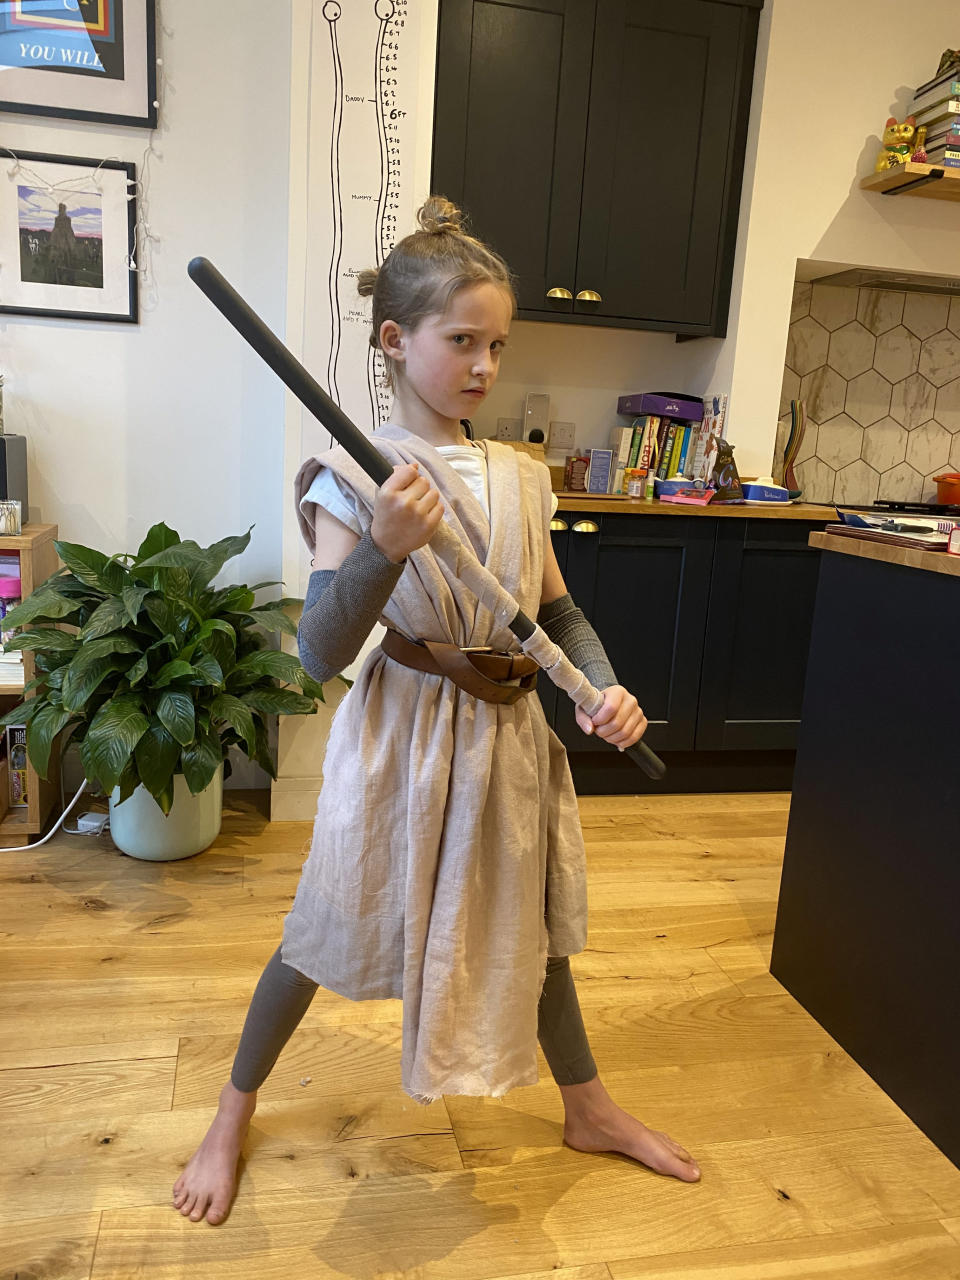 Pearl Parkin dressed as Rey from Star Wars. See SWNS story SWBRcostume. An eight-year old girl is raising money for charity by dressing-up every day as characters like Ziggy Stardust, Lady Gaga - and Jacky Weaver. Pearl Parkin started the challenge on February 2 and has managed to become a new star each morning. Her creations include Billie Eilish, Frida Kahlo, Rey Skywalker, Elton John, John Lennon - and Handforth Parish Council's Weaver. Pearl, from Bath, Somerset, has raised more than £700 for Save the Children and hopes to reach £1,000 by March 8.
